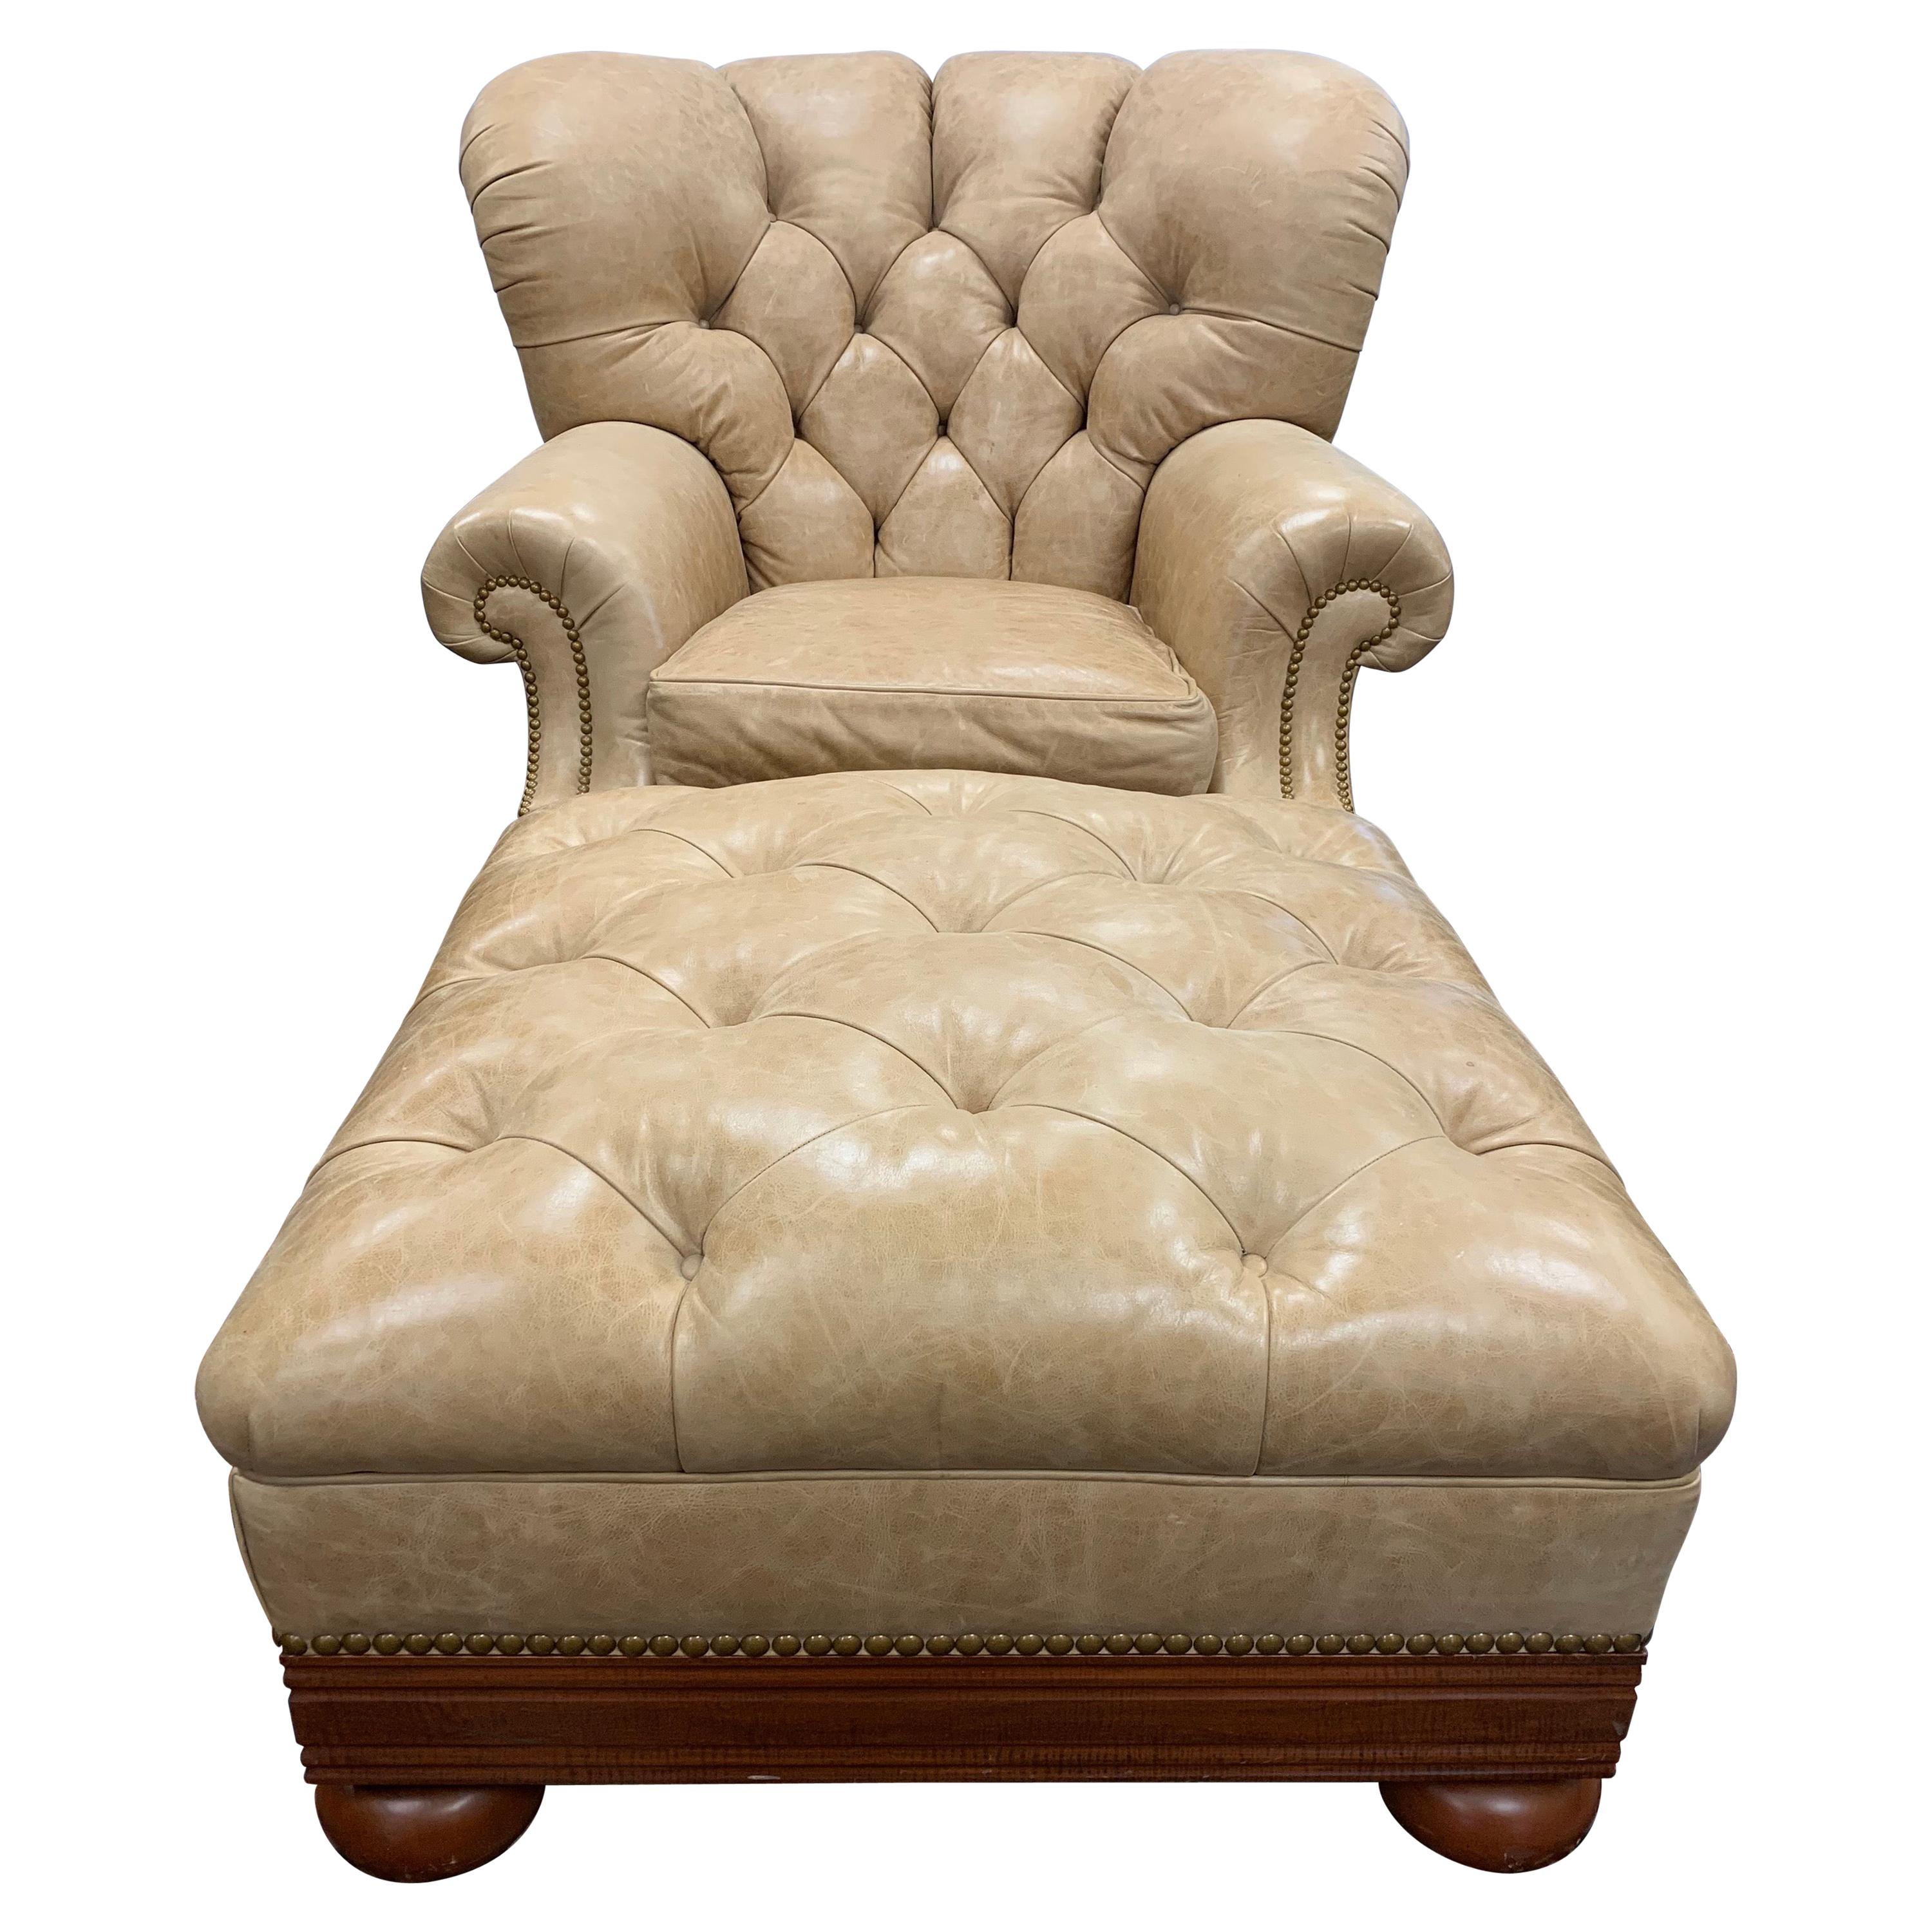 Ralph Lauren Tufted Beige Leather and Mahogany Writer's Club Chair and Ottoman